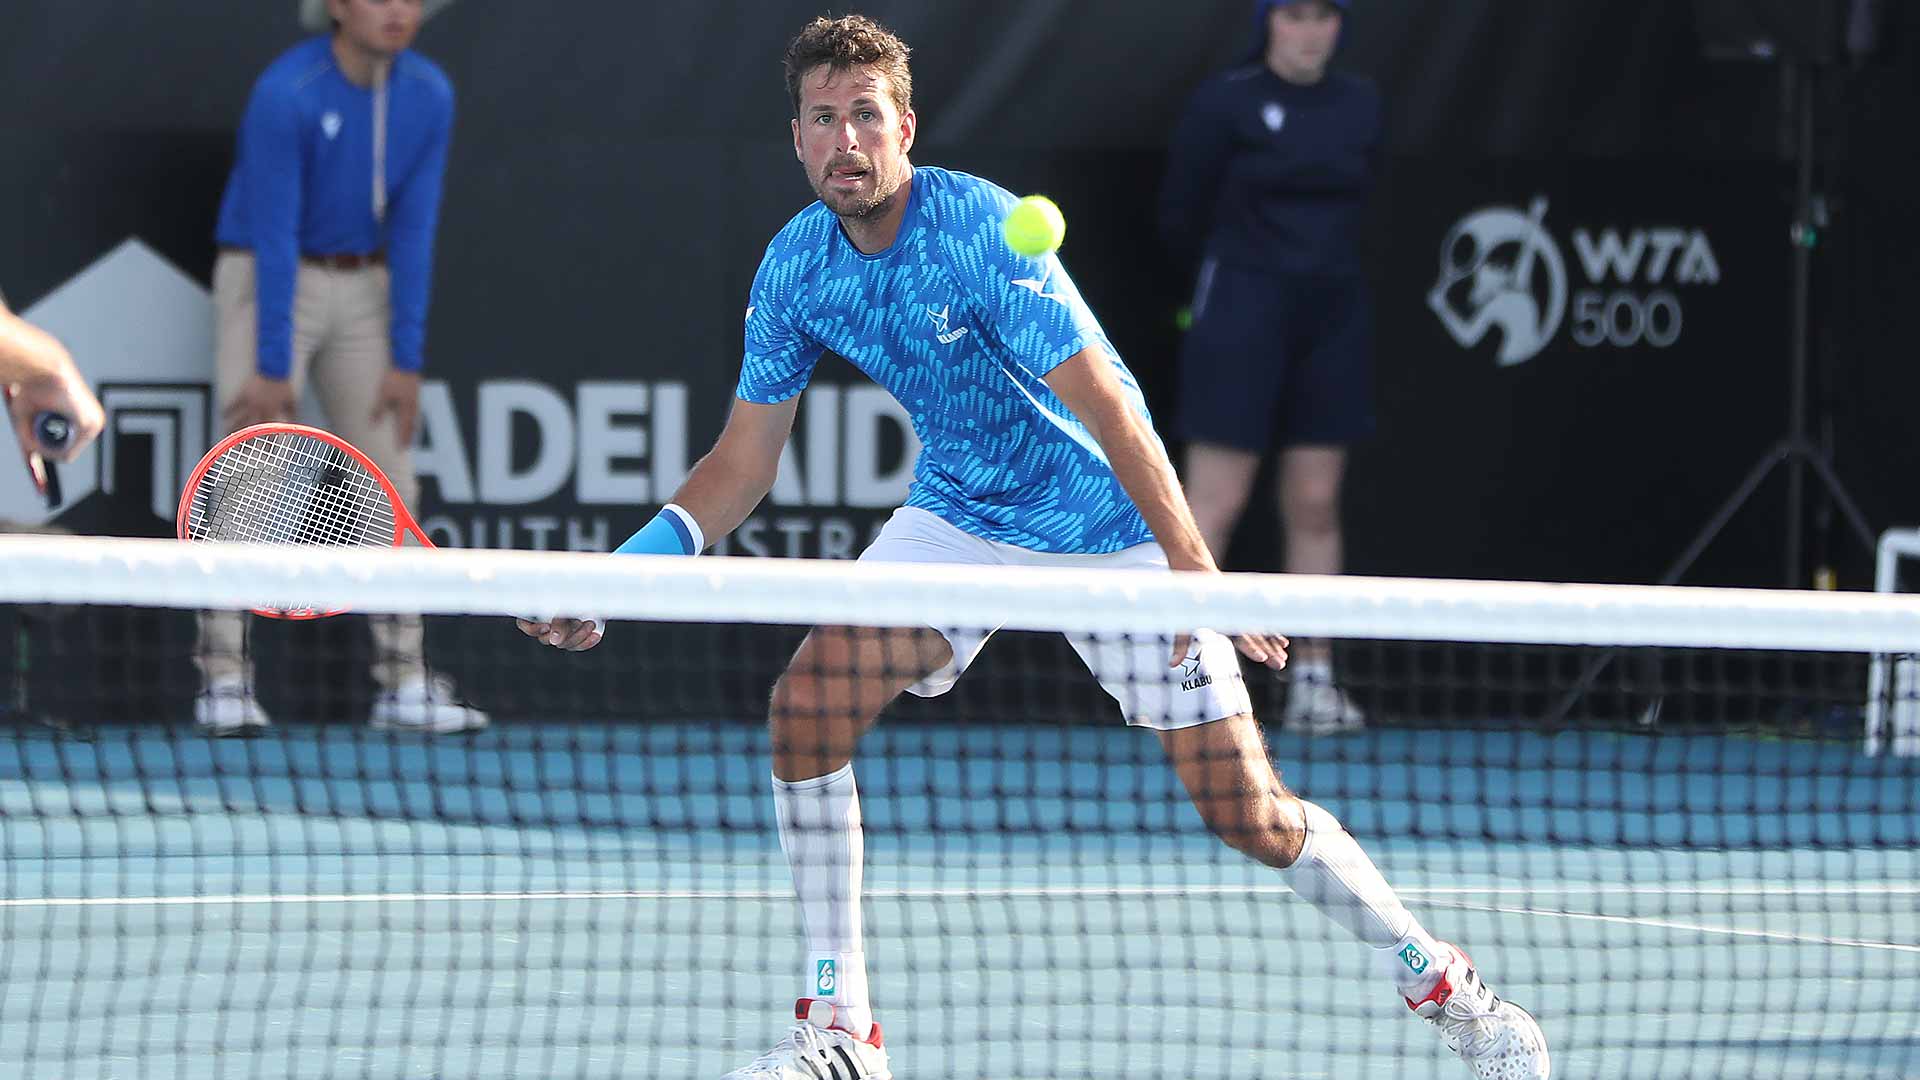 Robin Haase competes in his second match of the day on Tuesday in Adelaide.